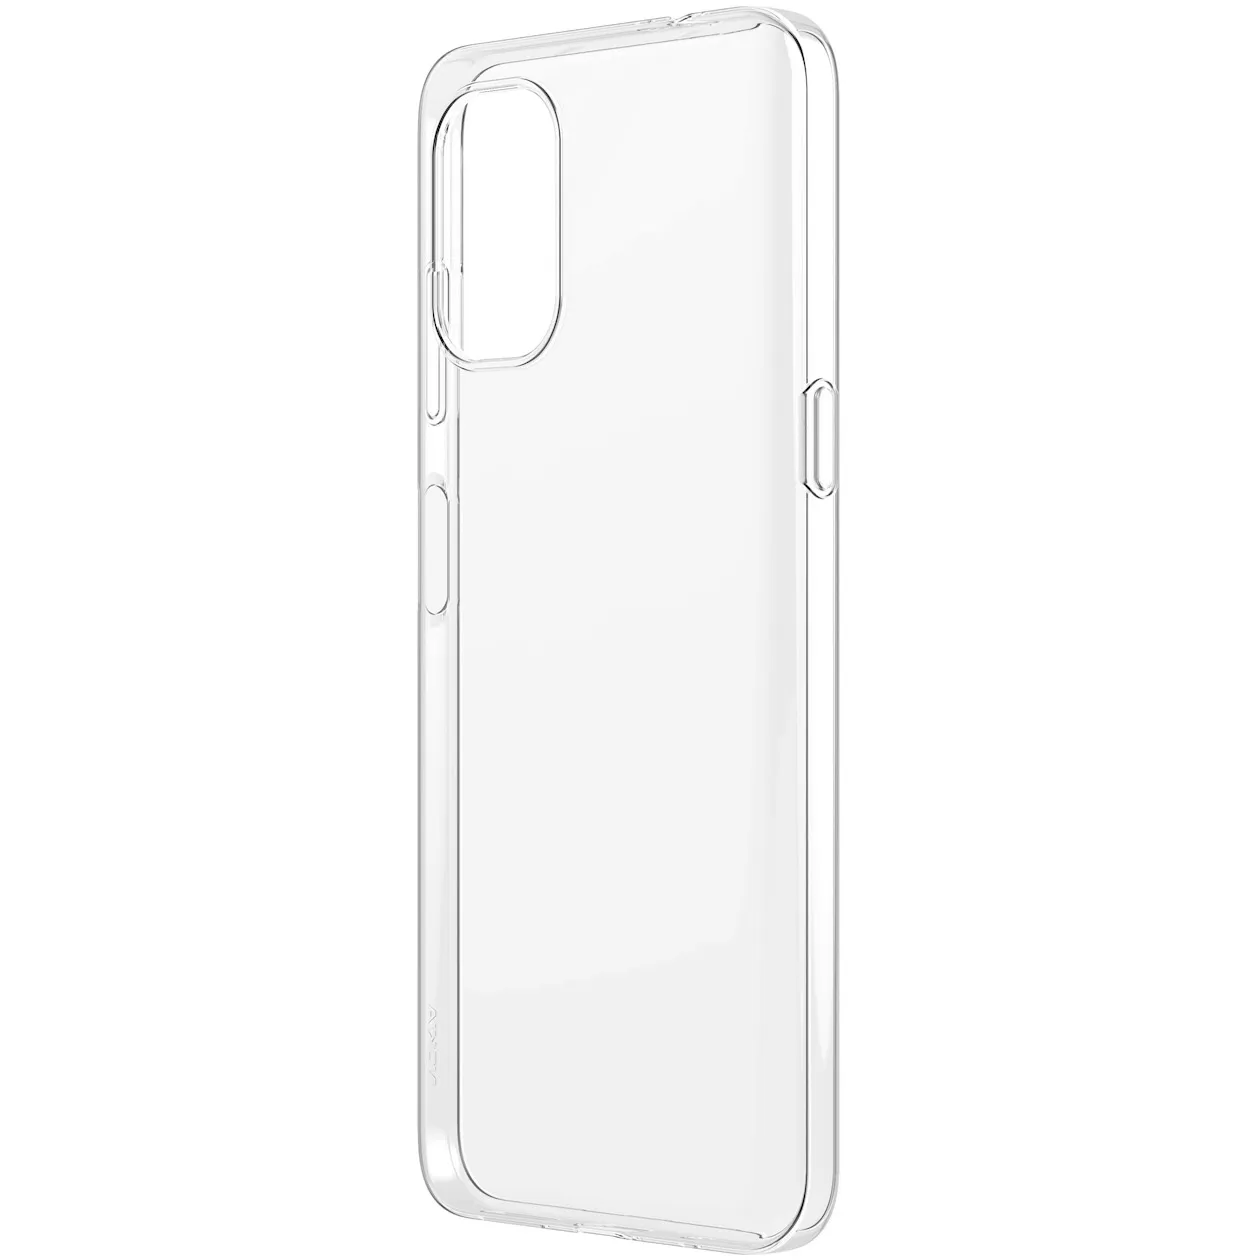 Nokia Clear Case voor G11 & G21 (100% recycled) Transparant